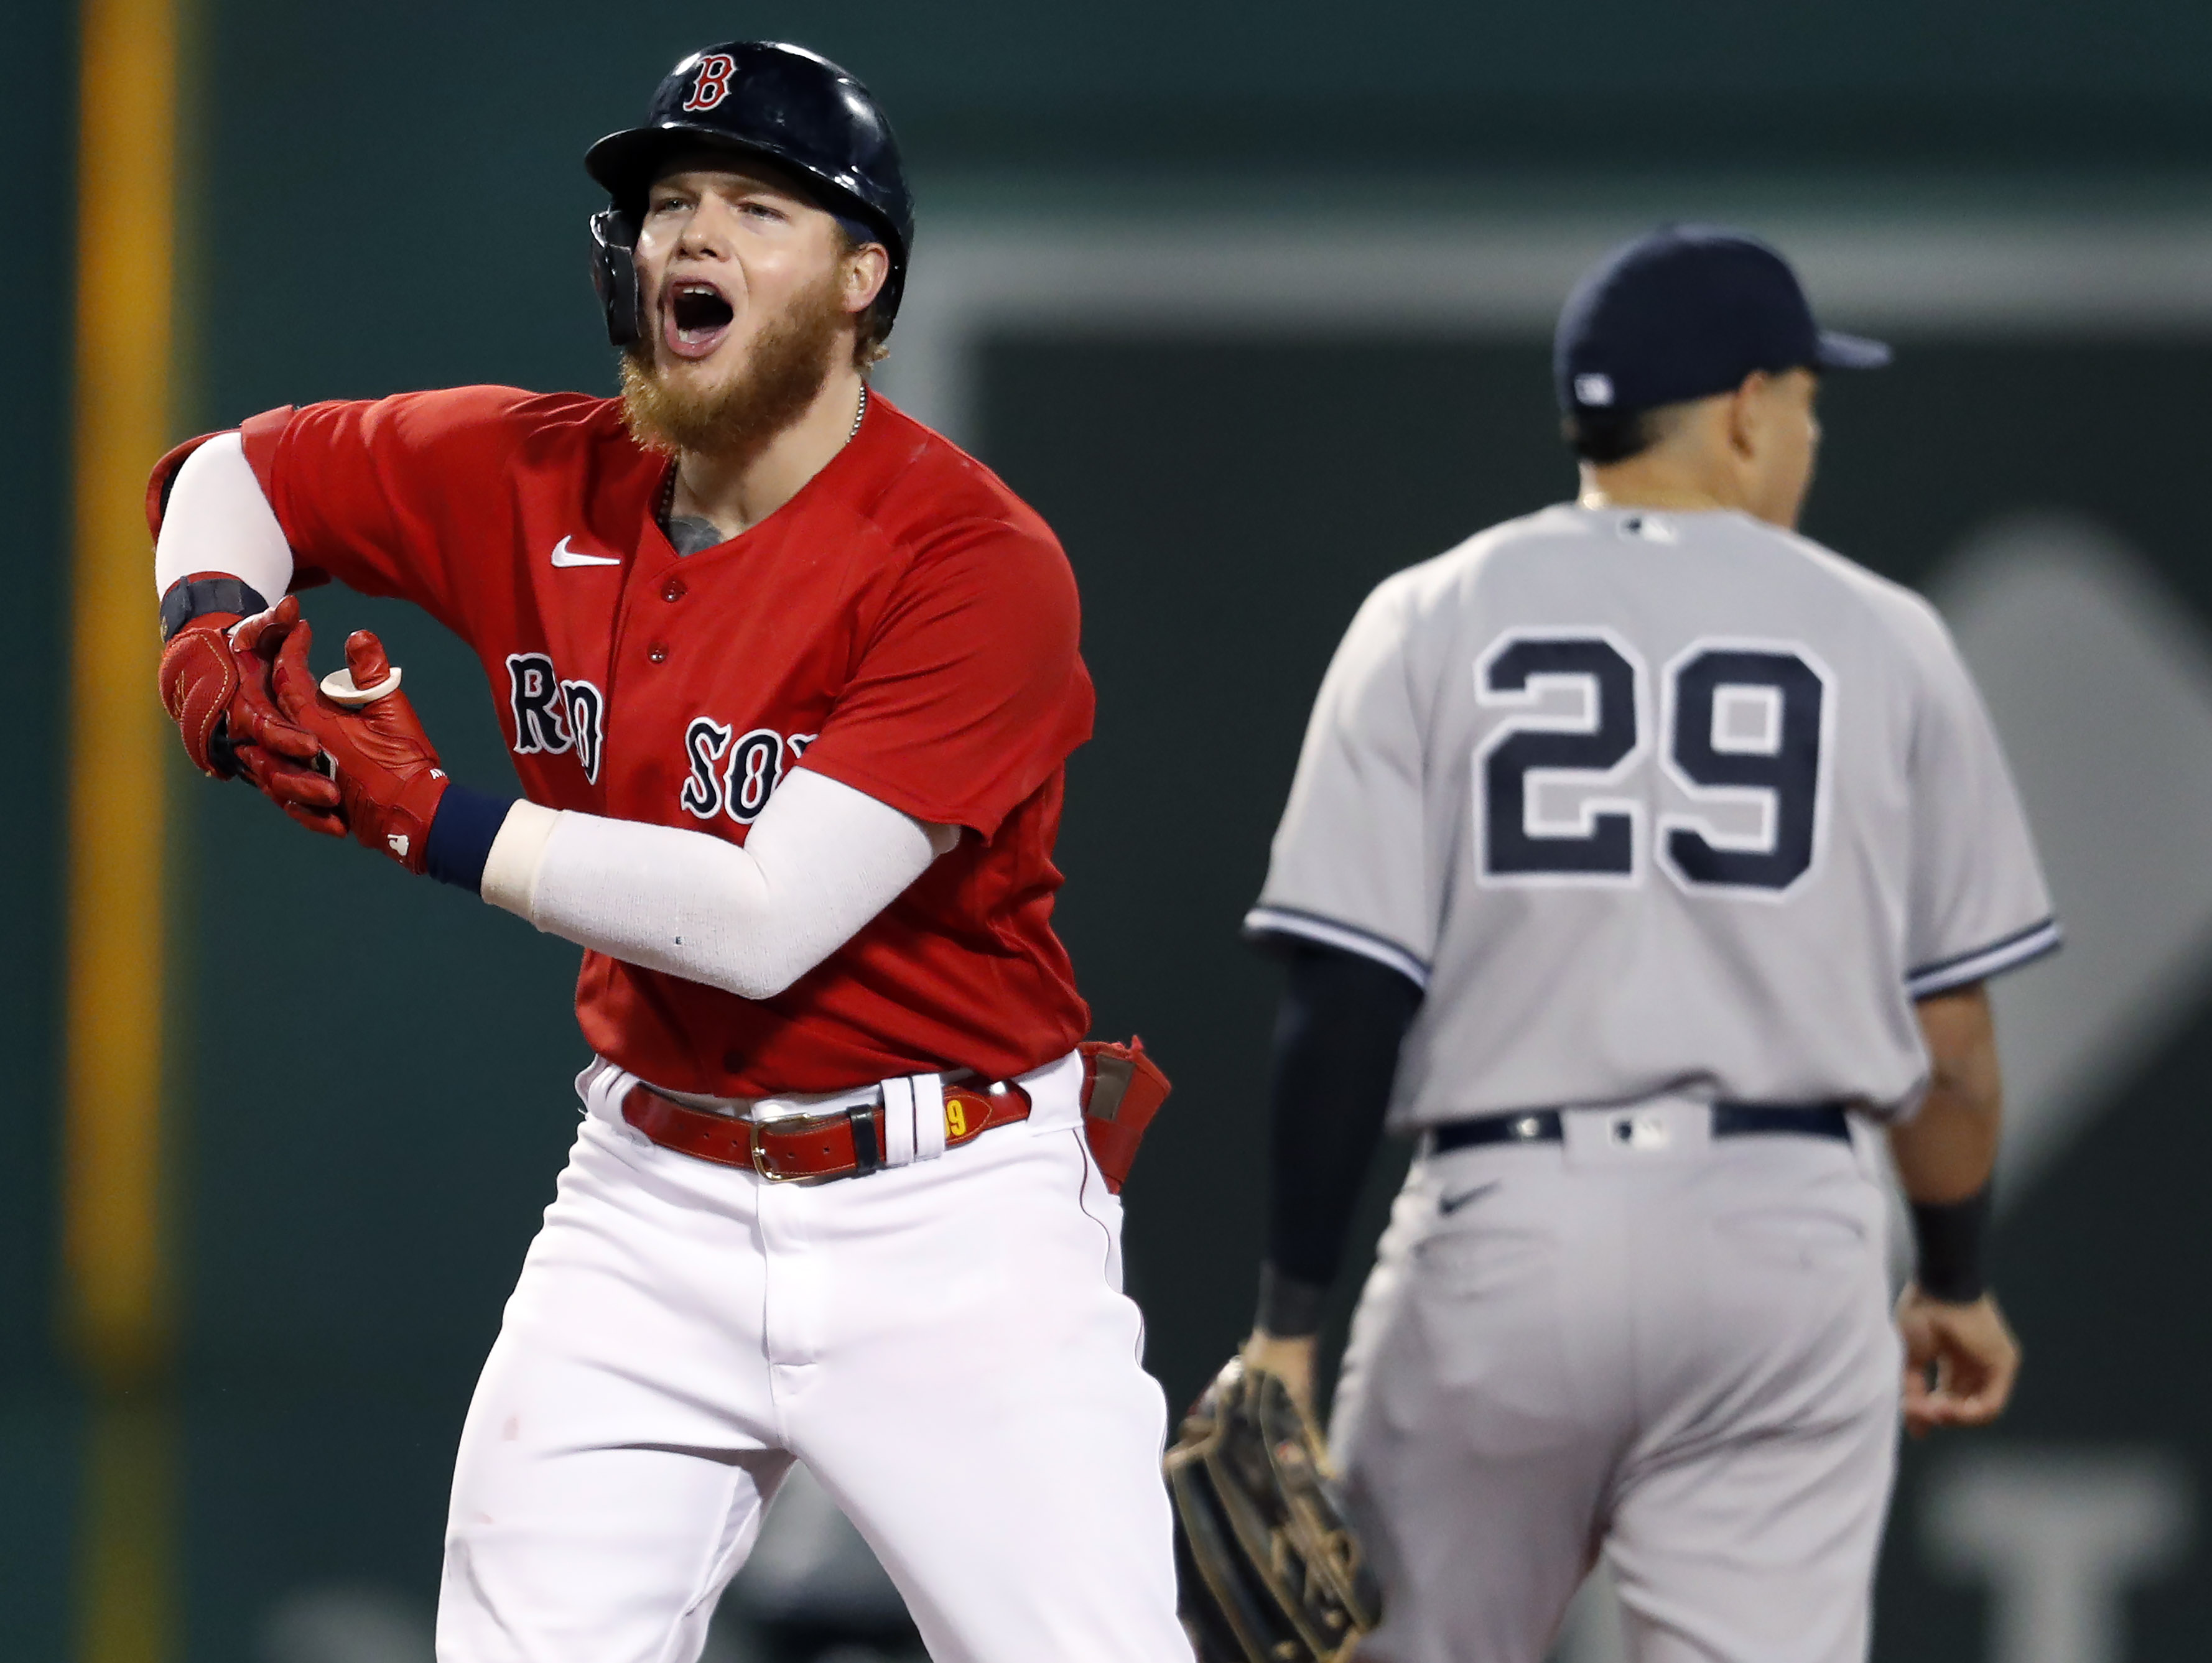 Red Sox beat Yankees, 6-2, in AL Wild Card Game to advance to ALDS vs. Rays